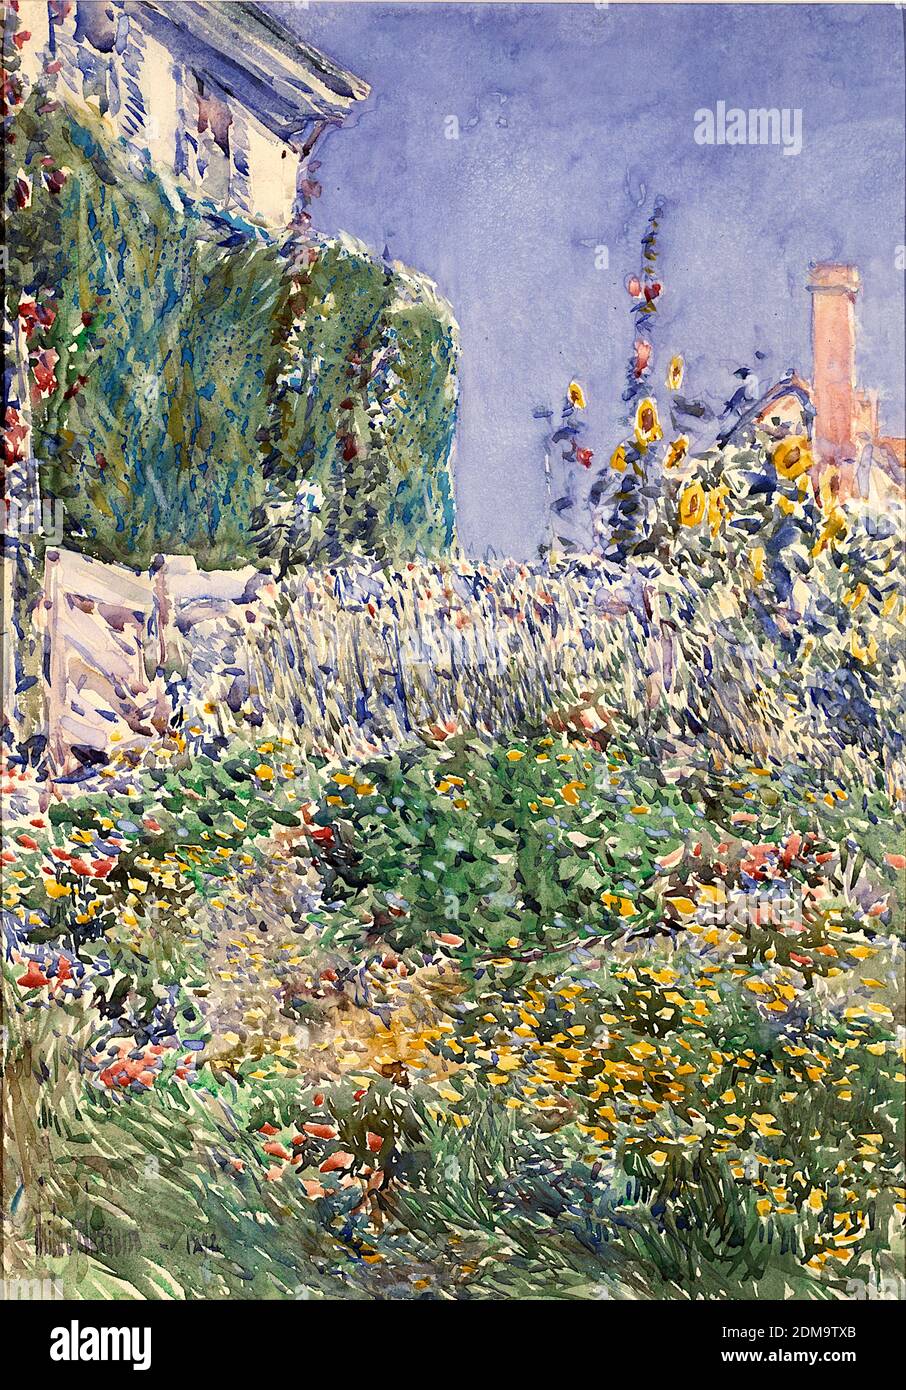 Thaxters Garden 1892 American Impressionist Painting by Childe Hassam - Very high resolution and quality image Stock Photo